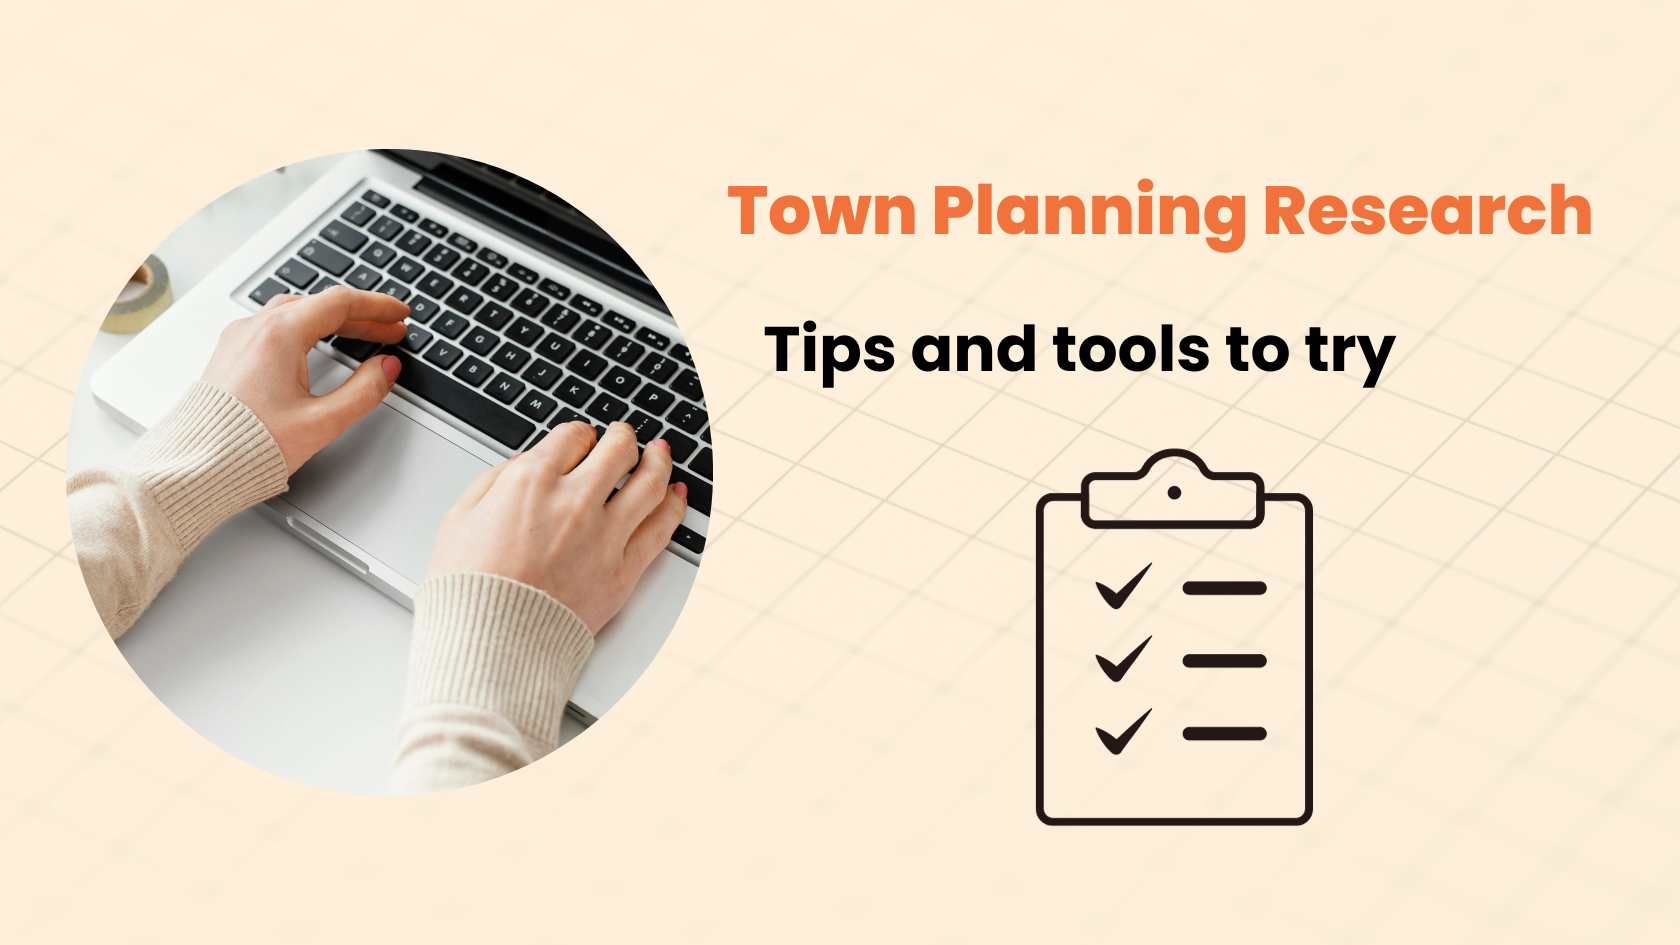 Tips for town planning research